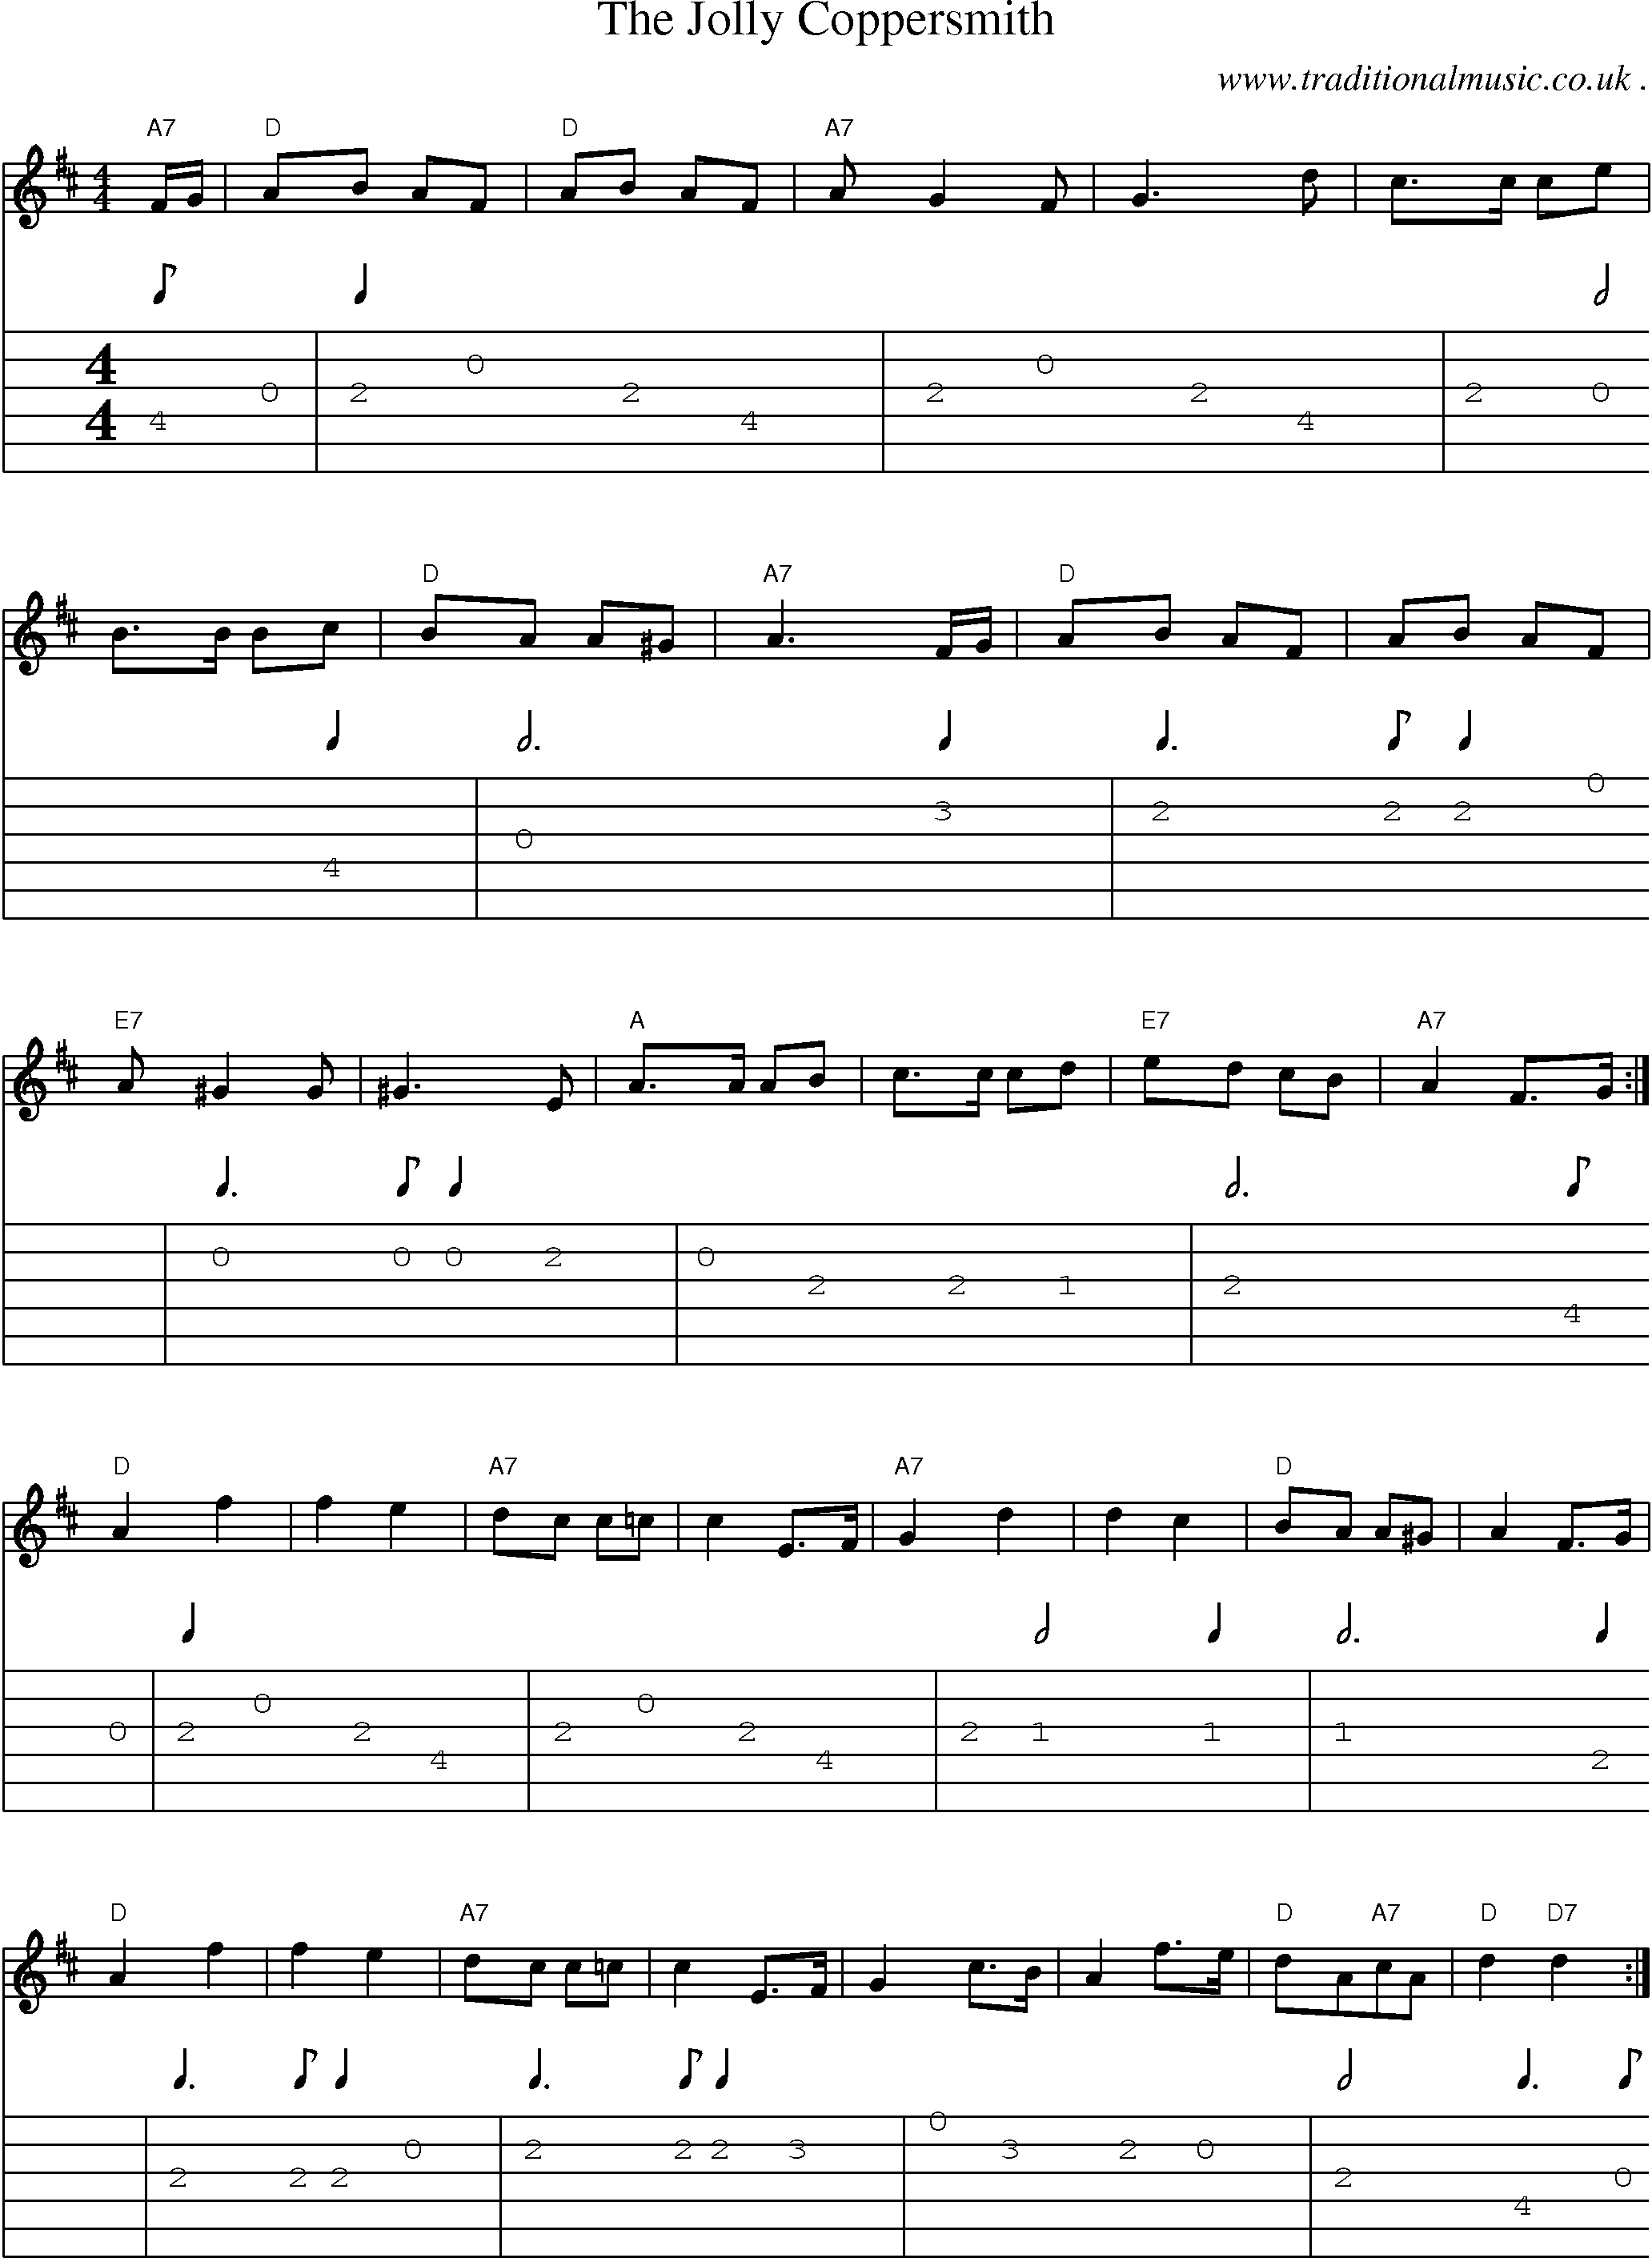 Sheet-Music and Guitar Tabs for The Jolly Coppersmith